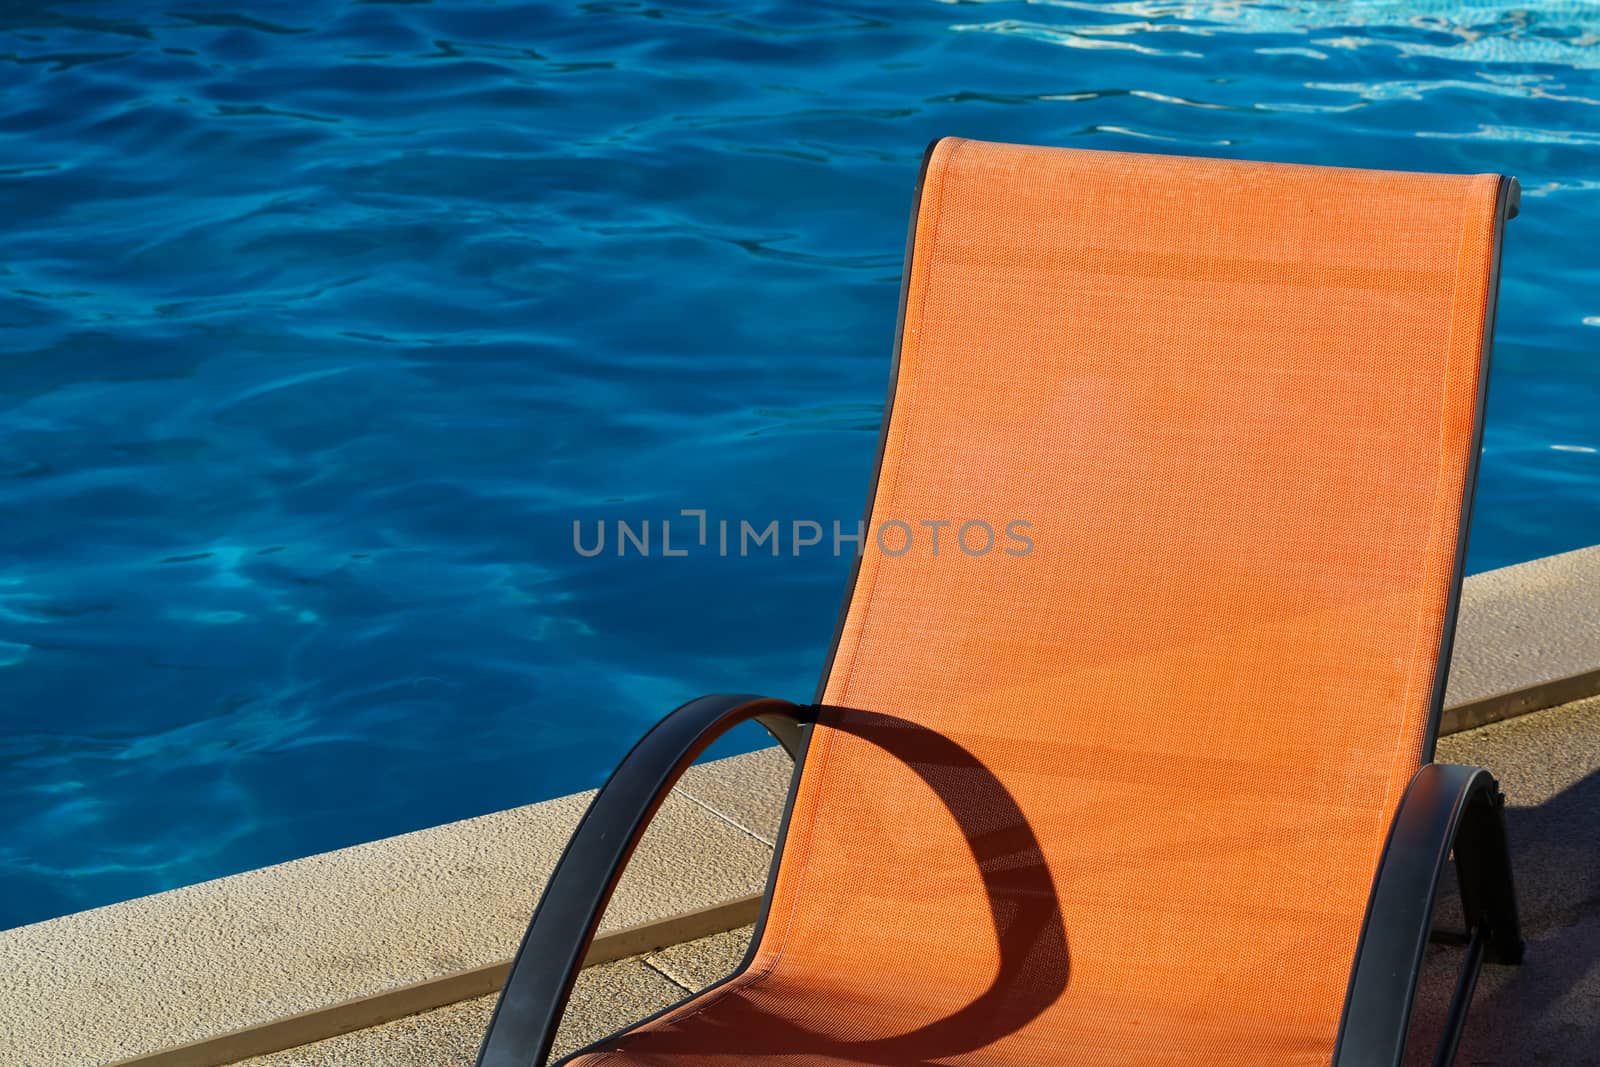 Chaise lounge around swimming pool at a sunny day